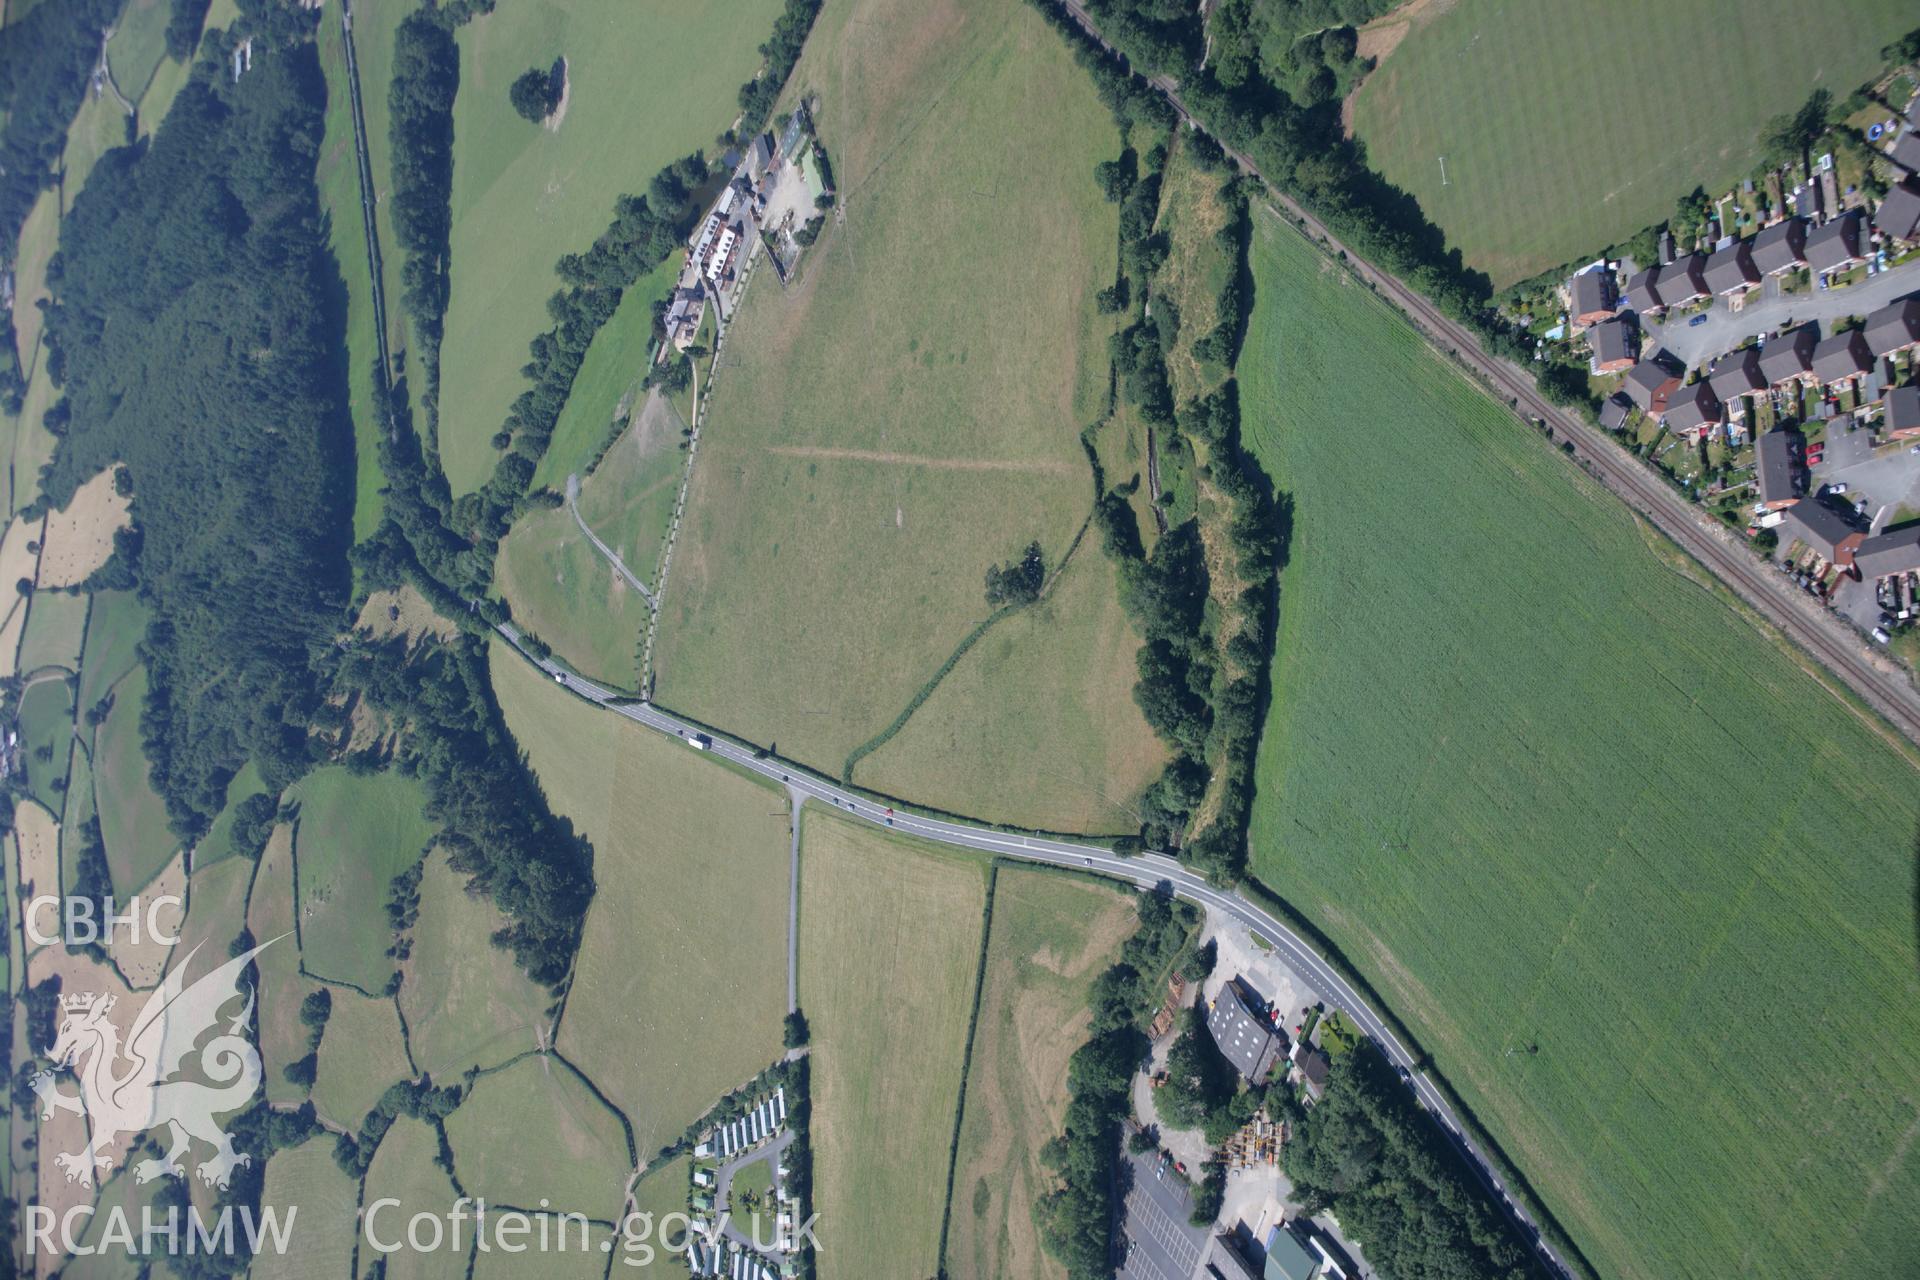 RCAHMW colour oblique aerial photograph of a Roman Road at Glanhafren. Taken on 17 July 2006 by Toby Driver.